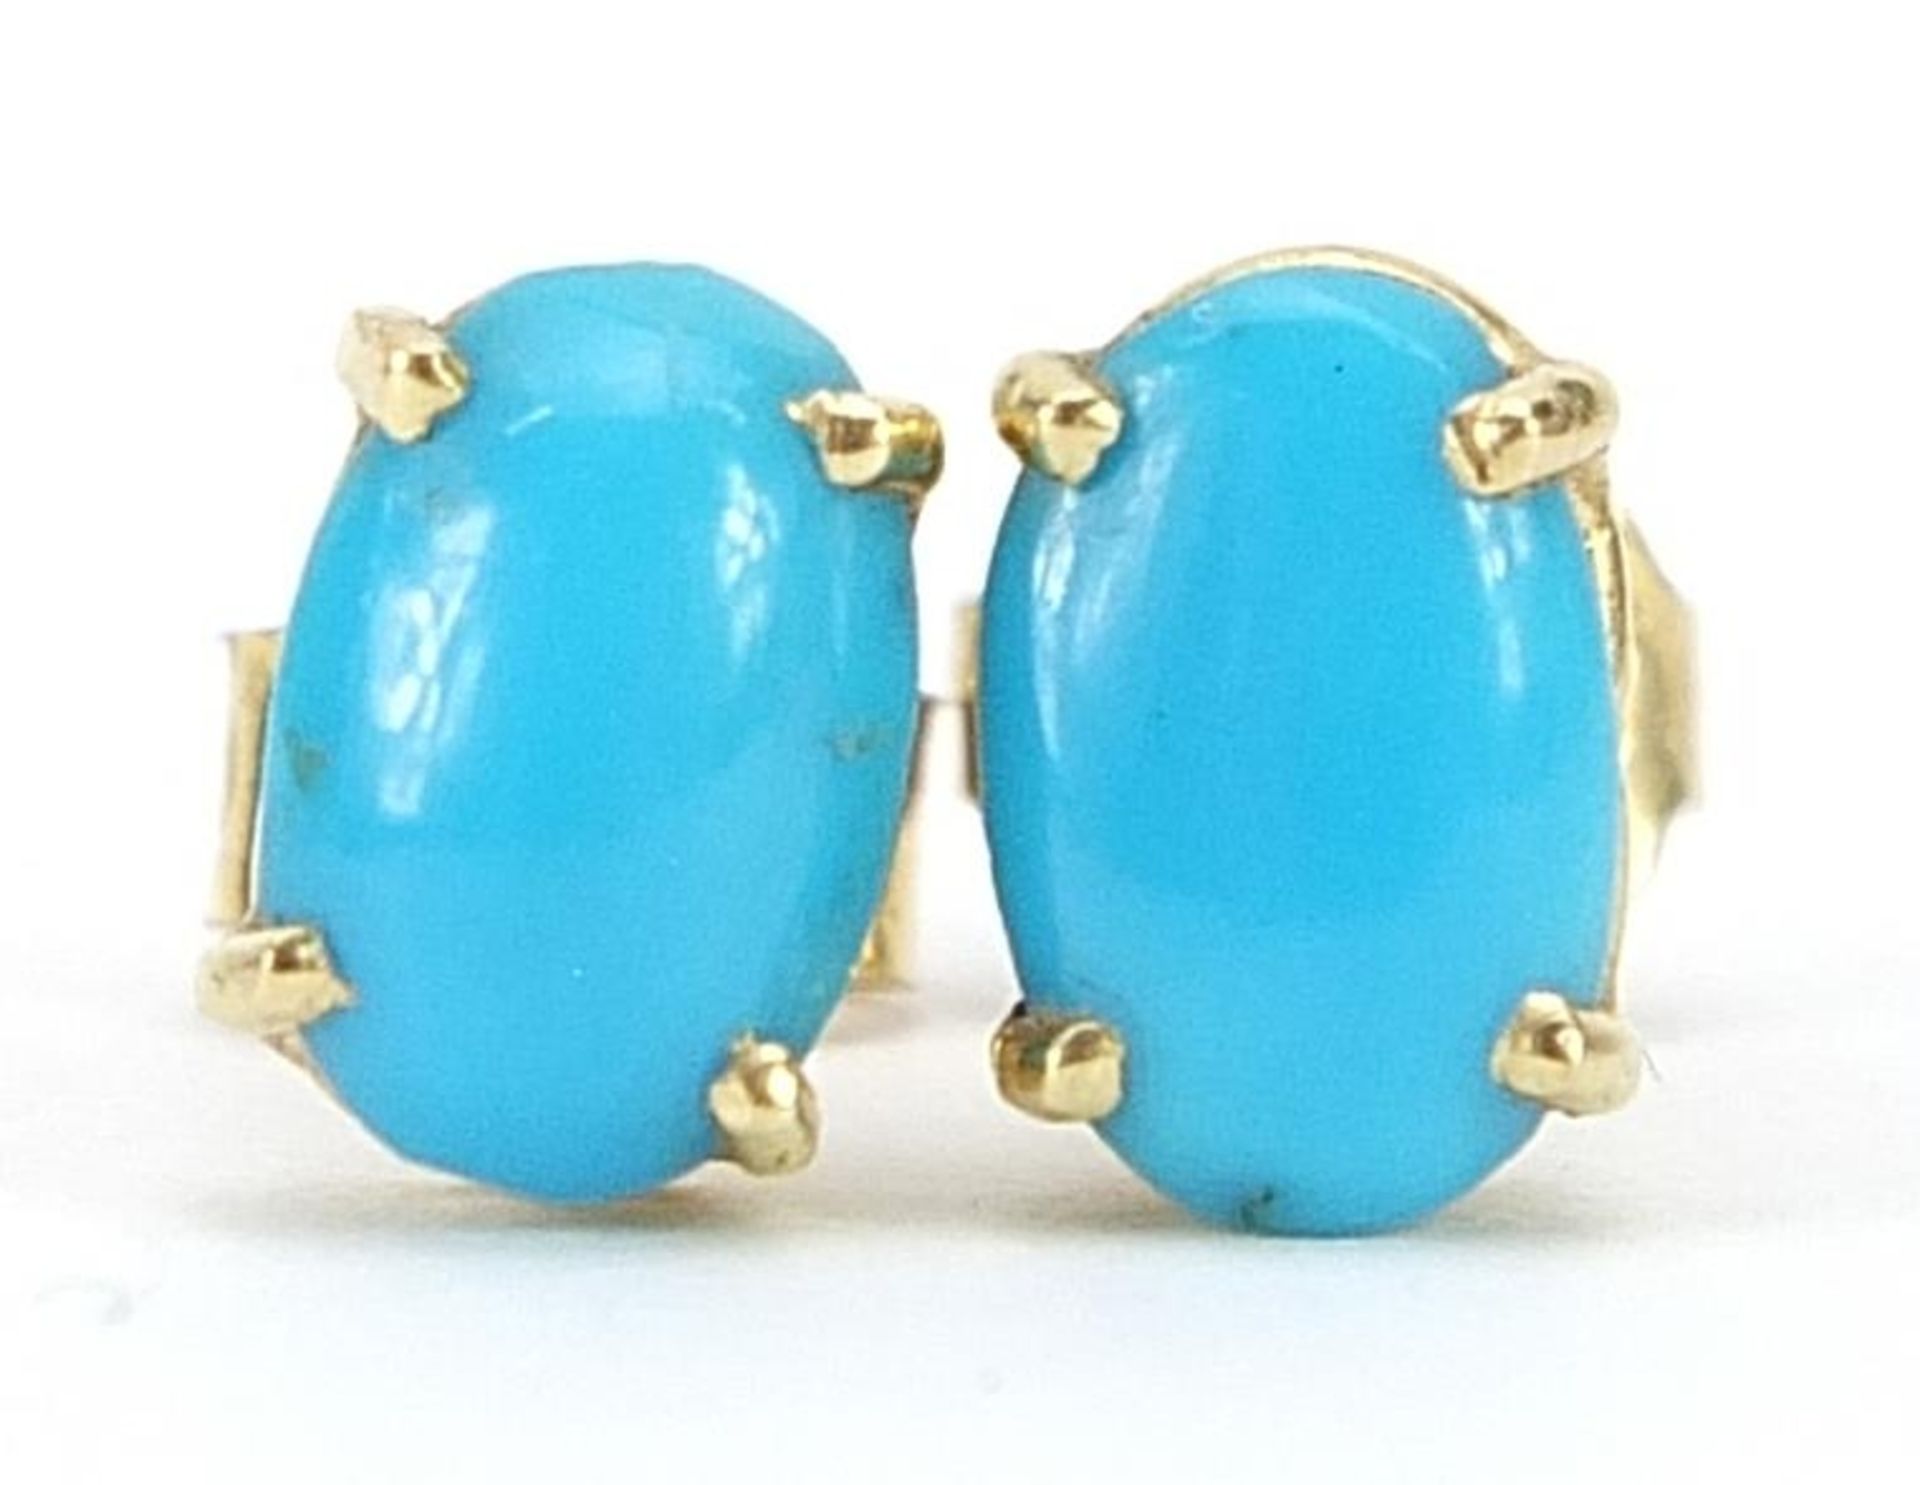 Pair of 18ct gold cabochon turquoise stud earrings, 8mm high, 2.1g